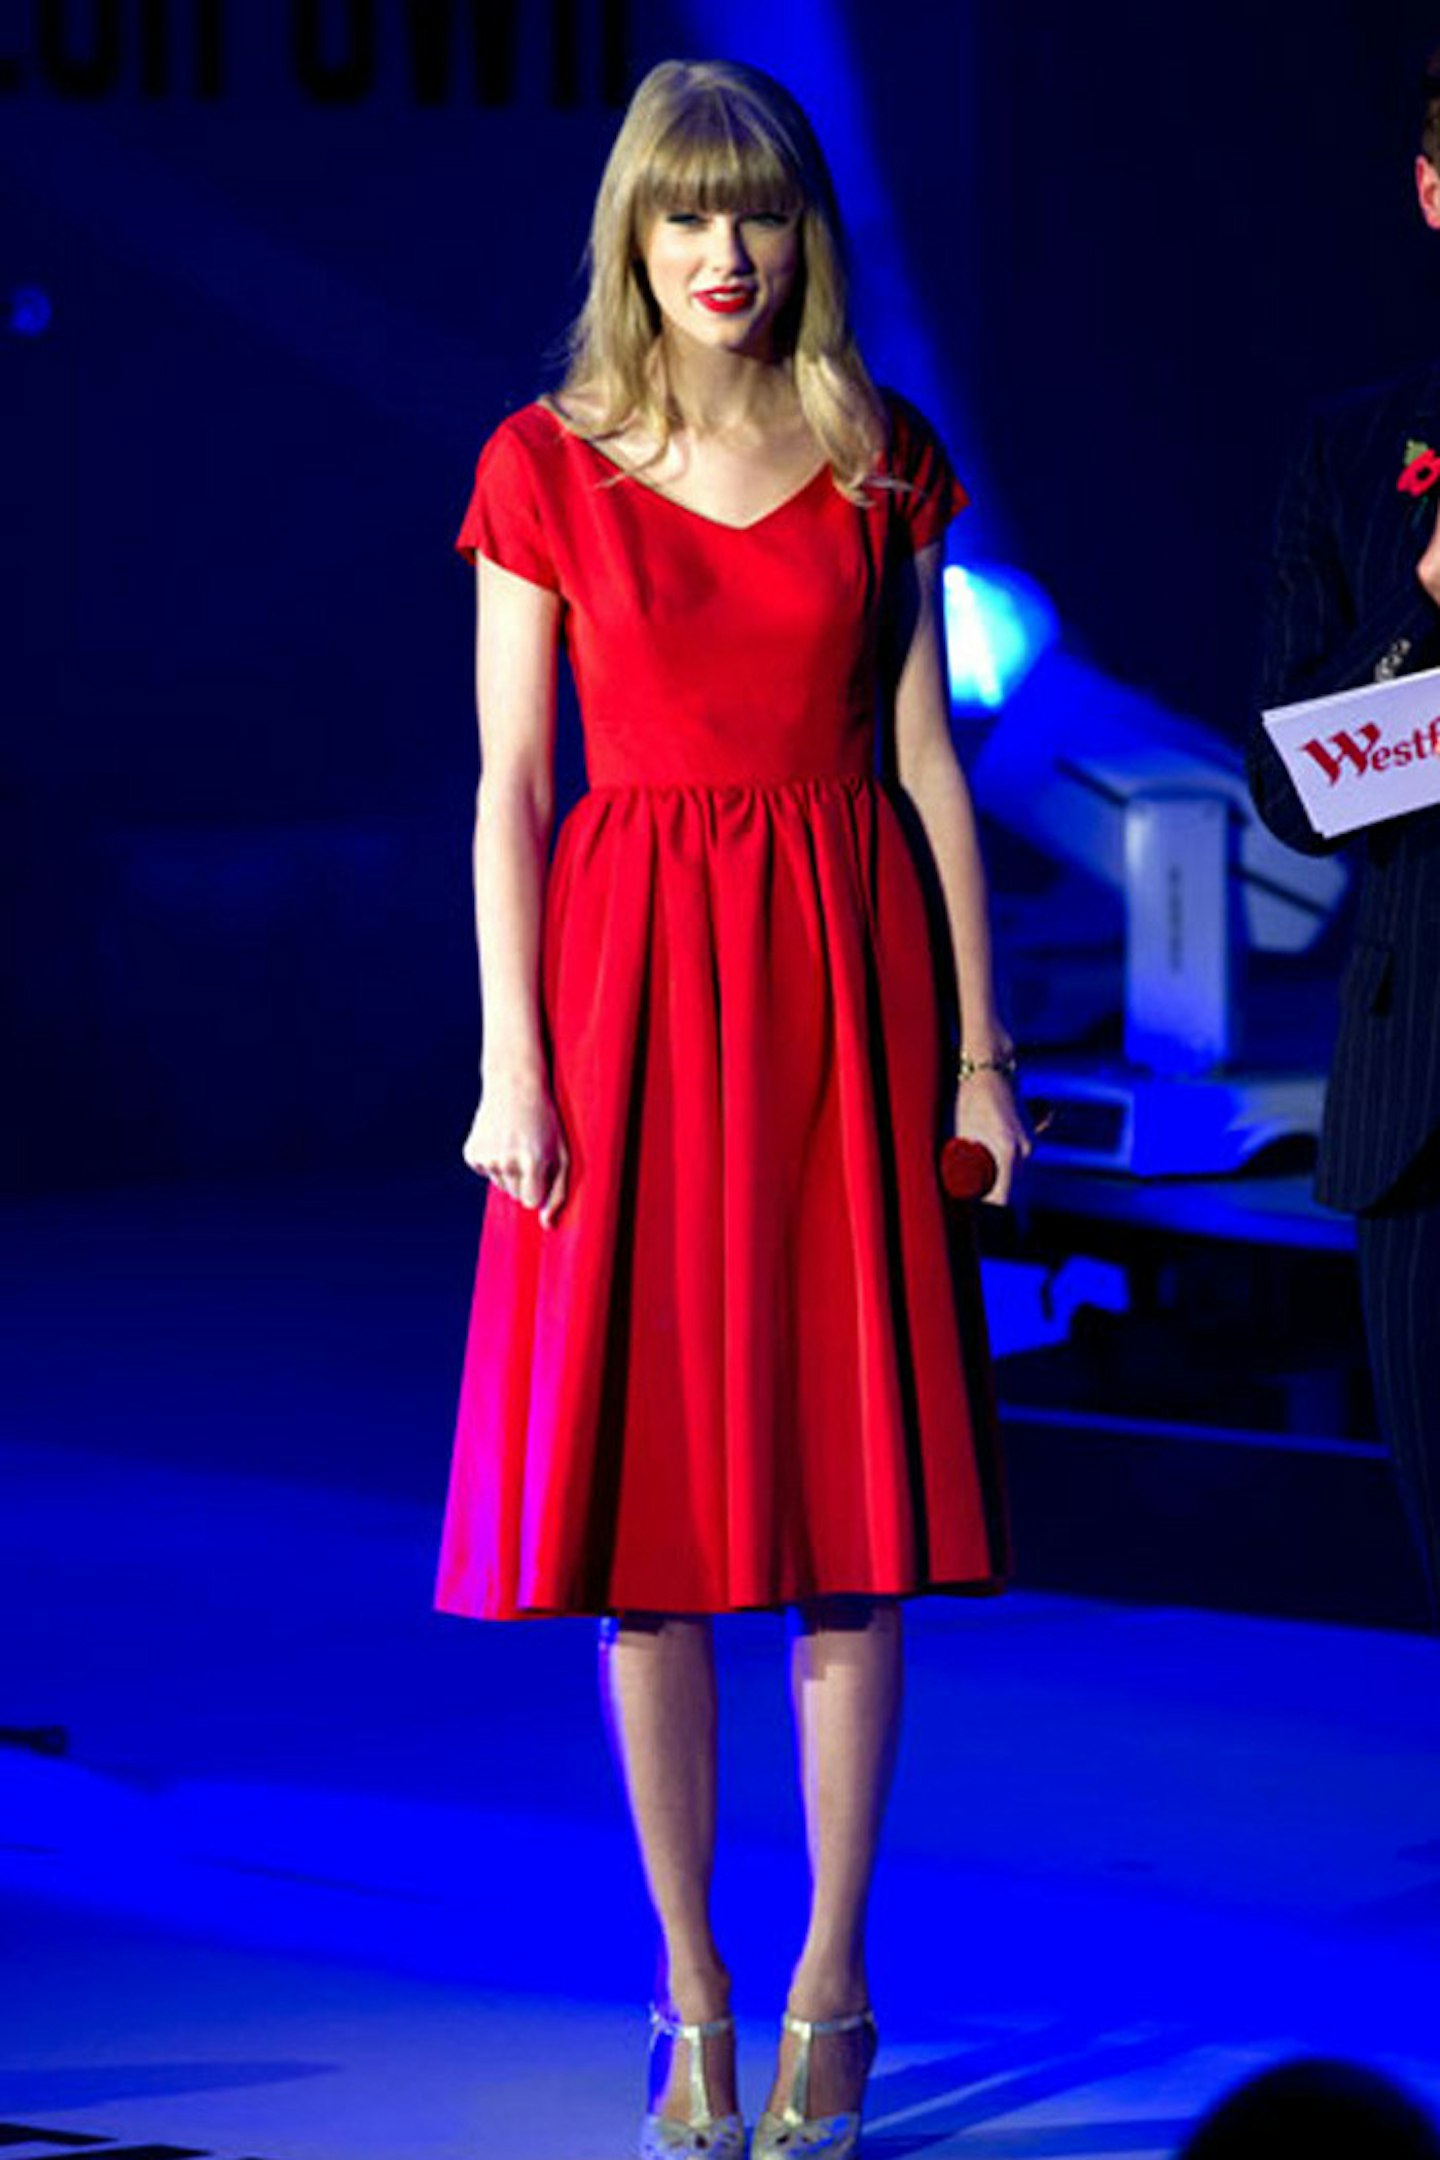 Taylor Swift at Westfield Shopping Centre in London - 6 November 2012